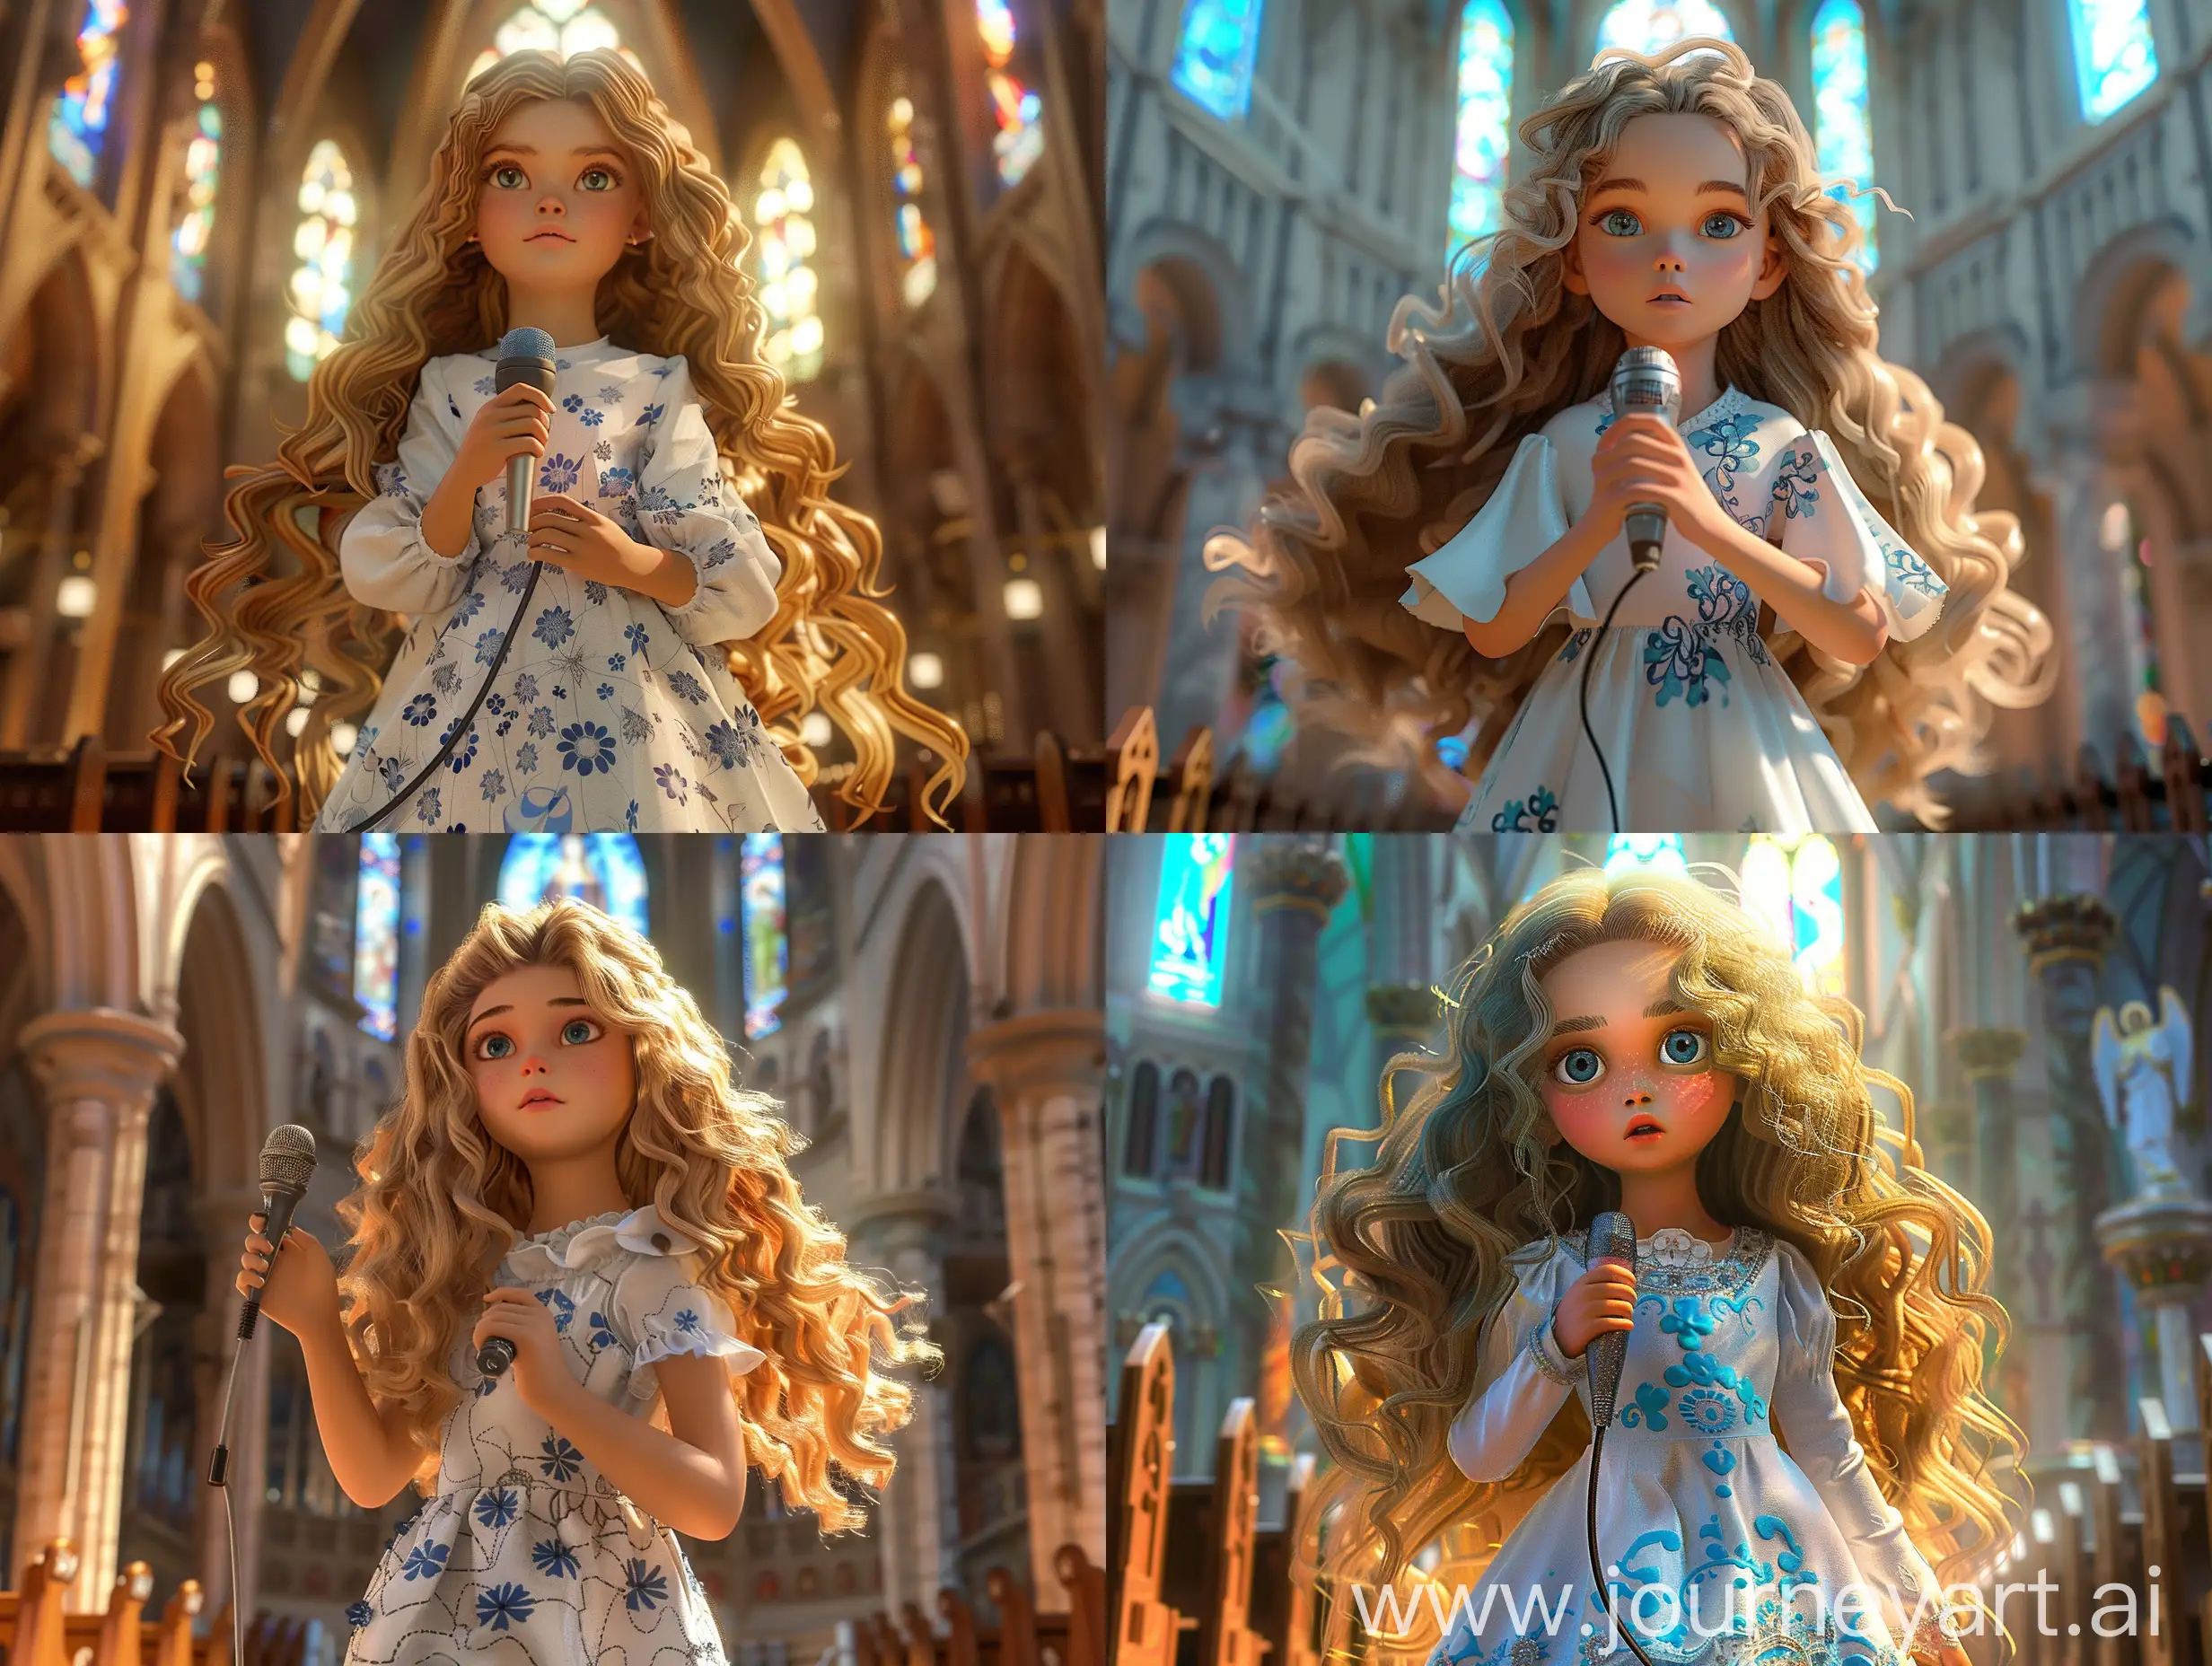 A captivating 3D Pixar-style illustration of a 9-year-old girl with cascading long, curly blonde hair. Adorned in a flowing white dress delicately patterned with vibrant blue flowers, she stands poised in the heart of a majestic church. Her small hands firmly grasp a handheld microphone as she gazes directly into the camera, her eyes radiating an unwavering determination. The warm, ethereal glow of the church's stained-glass windows bathes her face in a soft, celestial light, accentuating her serene expression and youthful beauty. Rendered in stunning 8K resolution, every detail of the scene comes alive, from the intricate details of the girl's dress to the intricate patterns of the stained-glass windows.